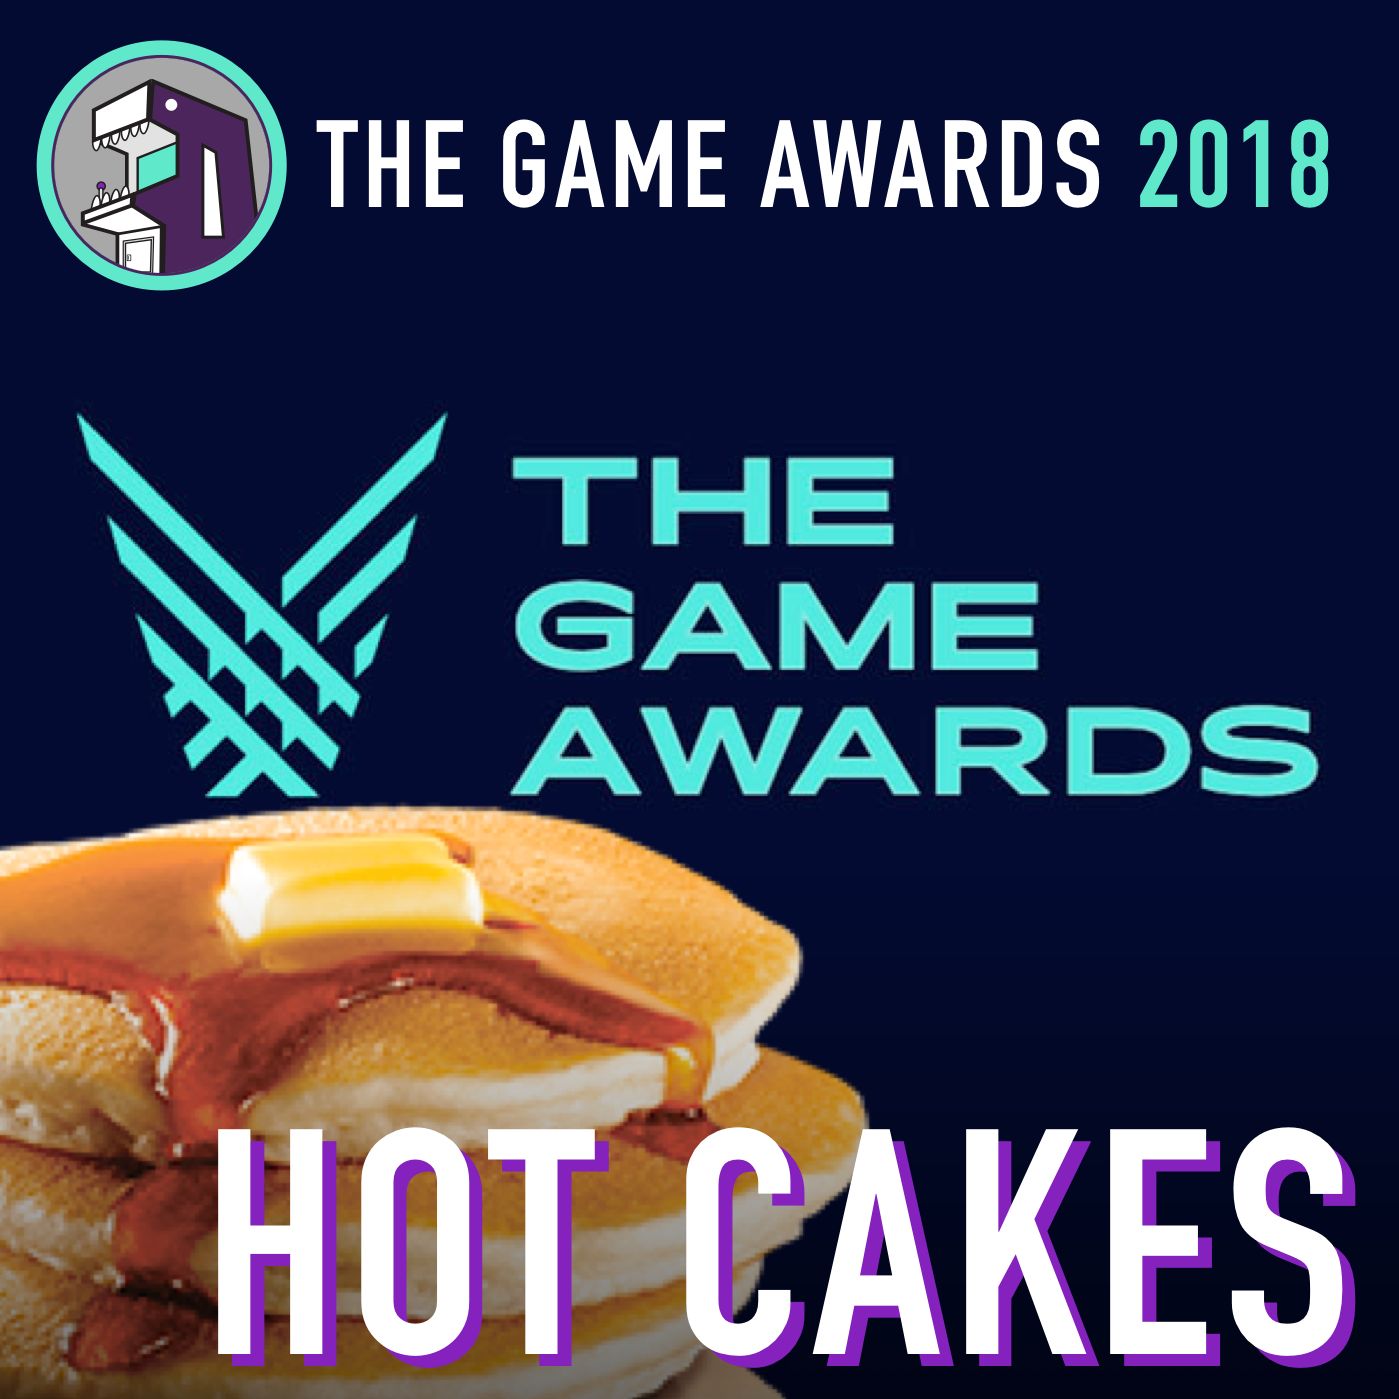 The Game Awards 2018 Hot Cakes!